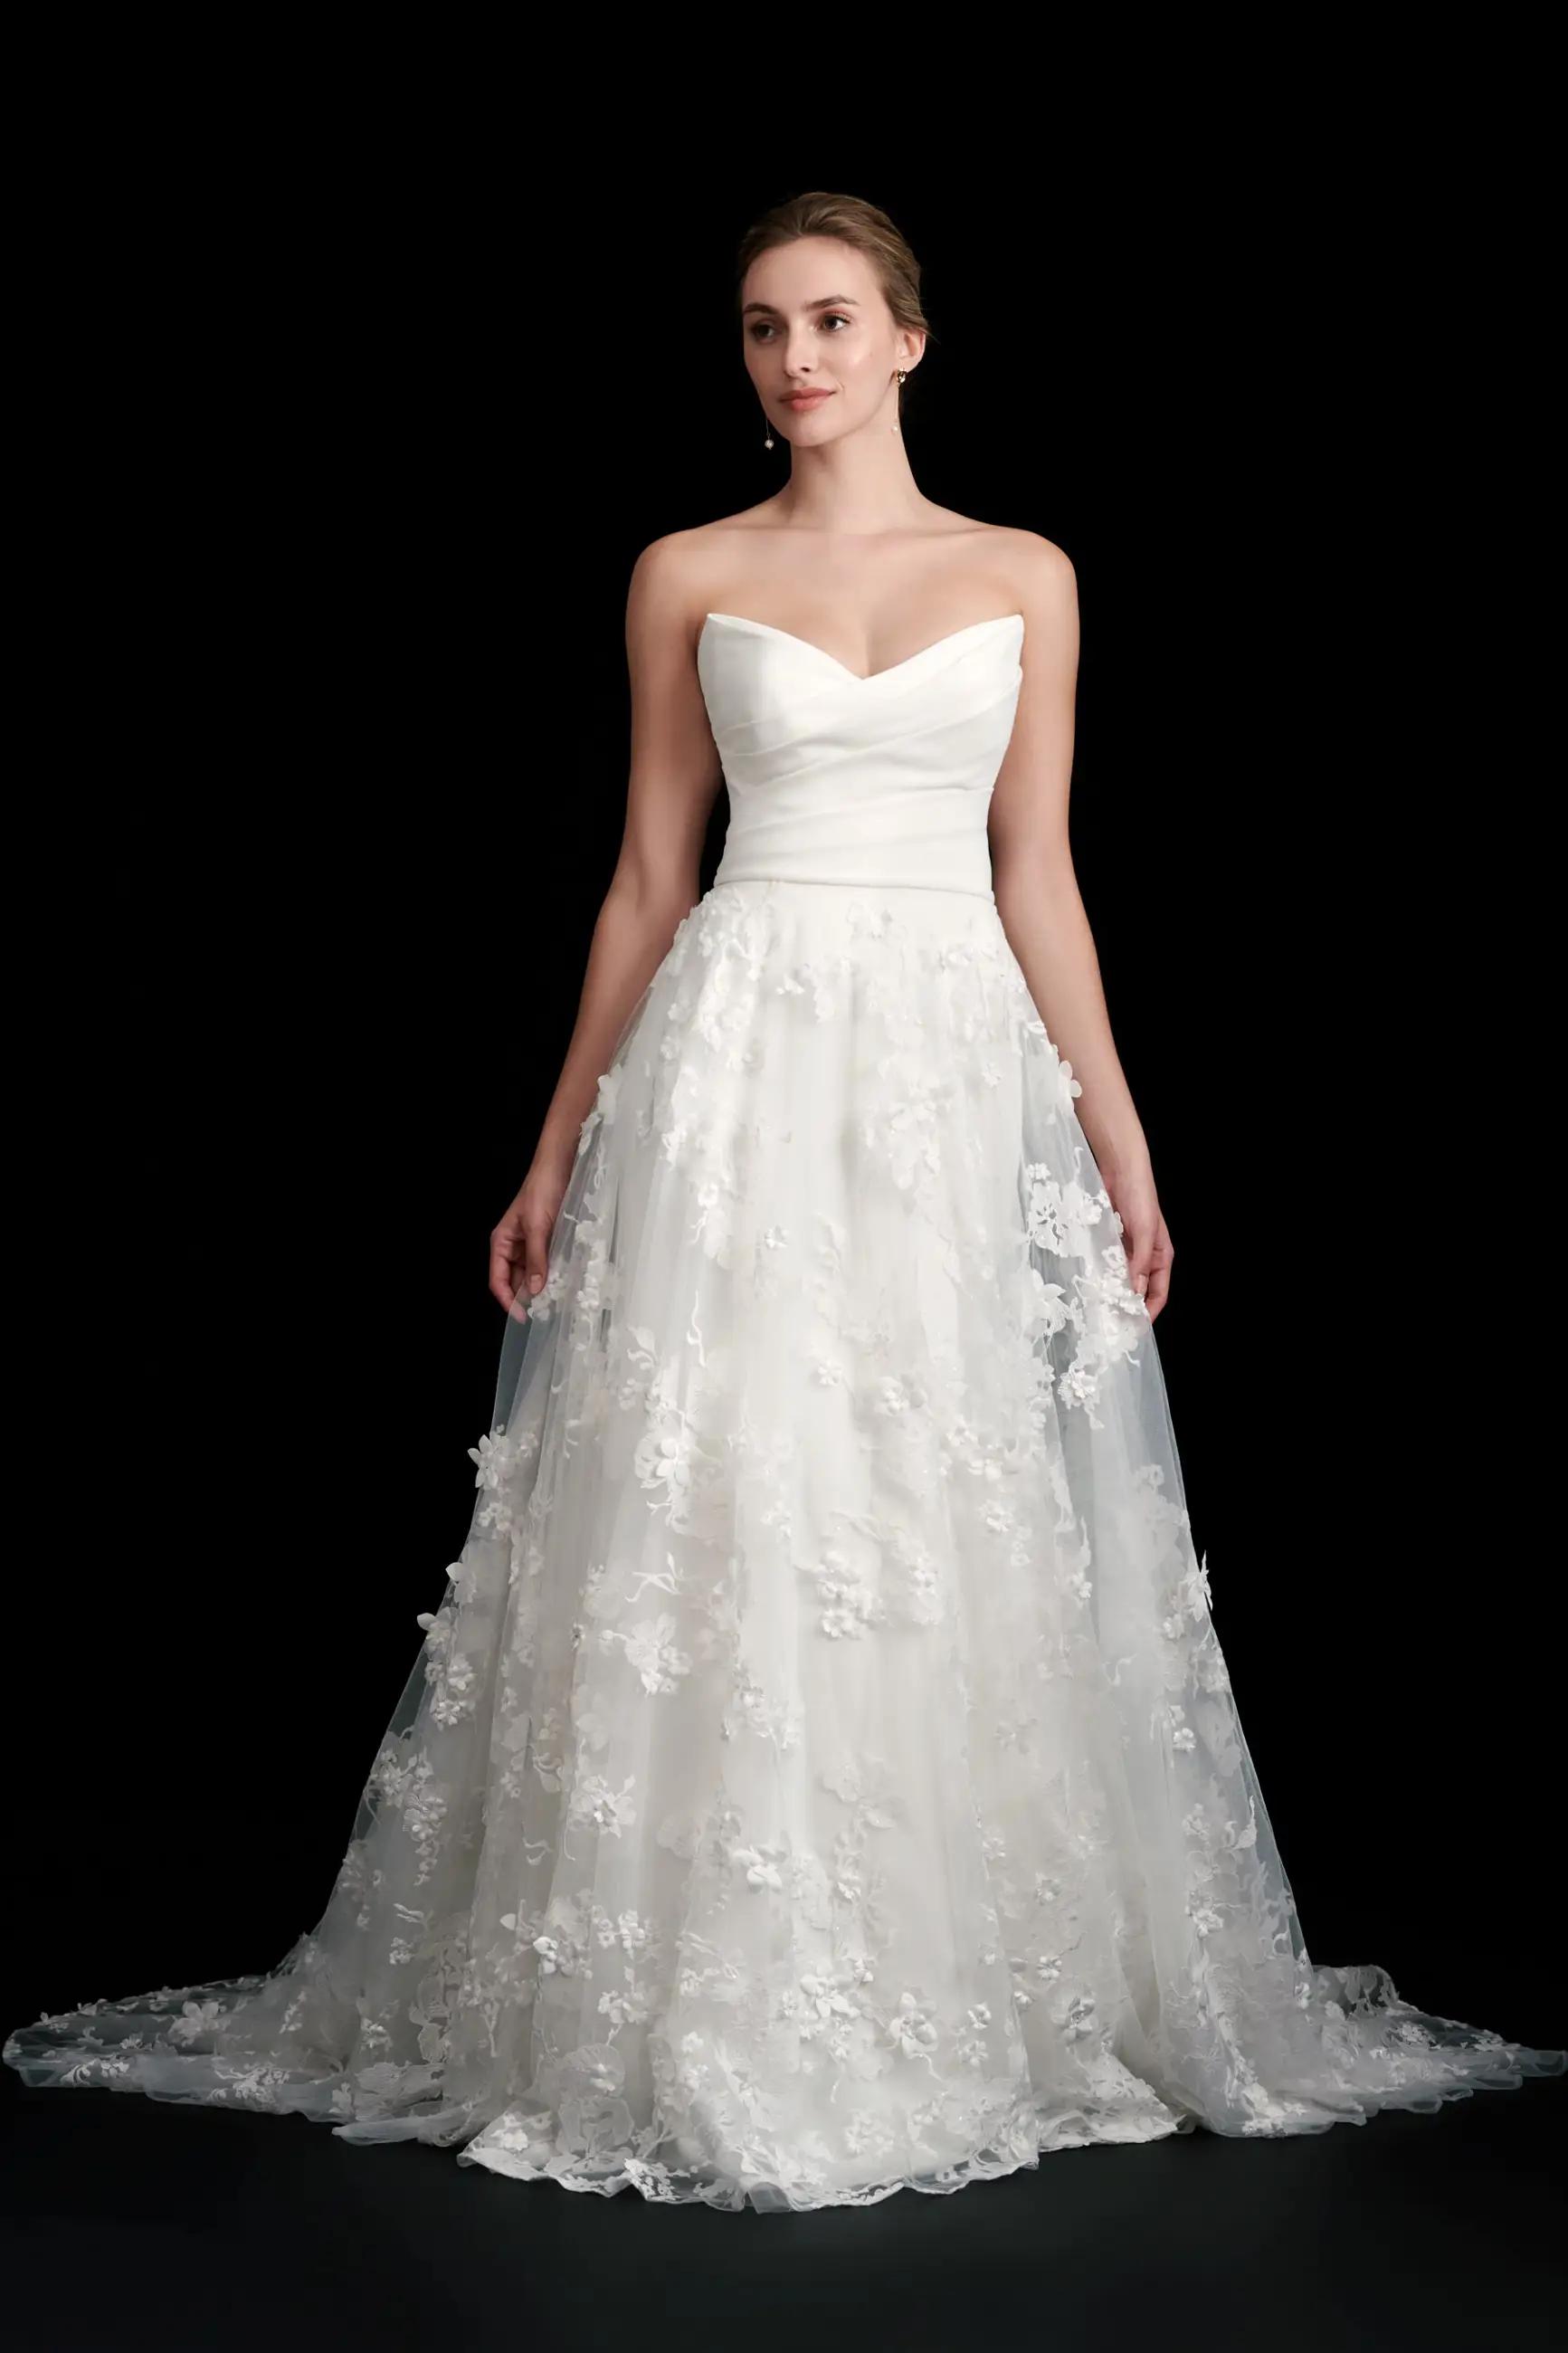 Crepe wedding dress with lace and tulle overskirt by Kelly Faetanini style Etta in Columbus, Ohio